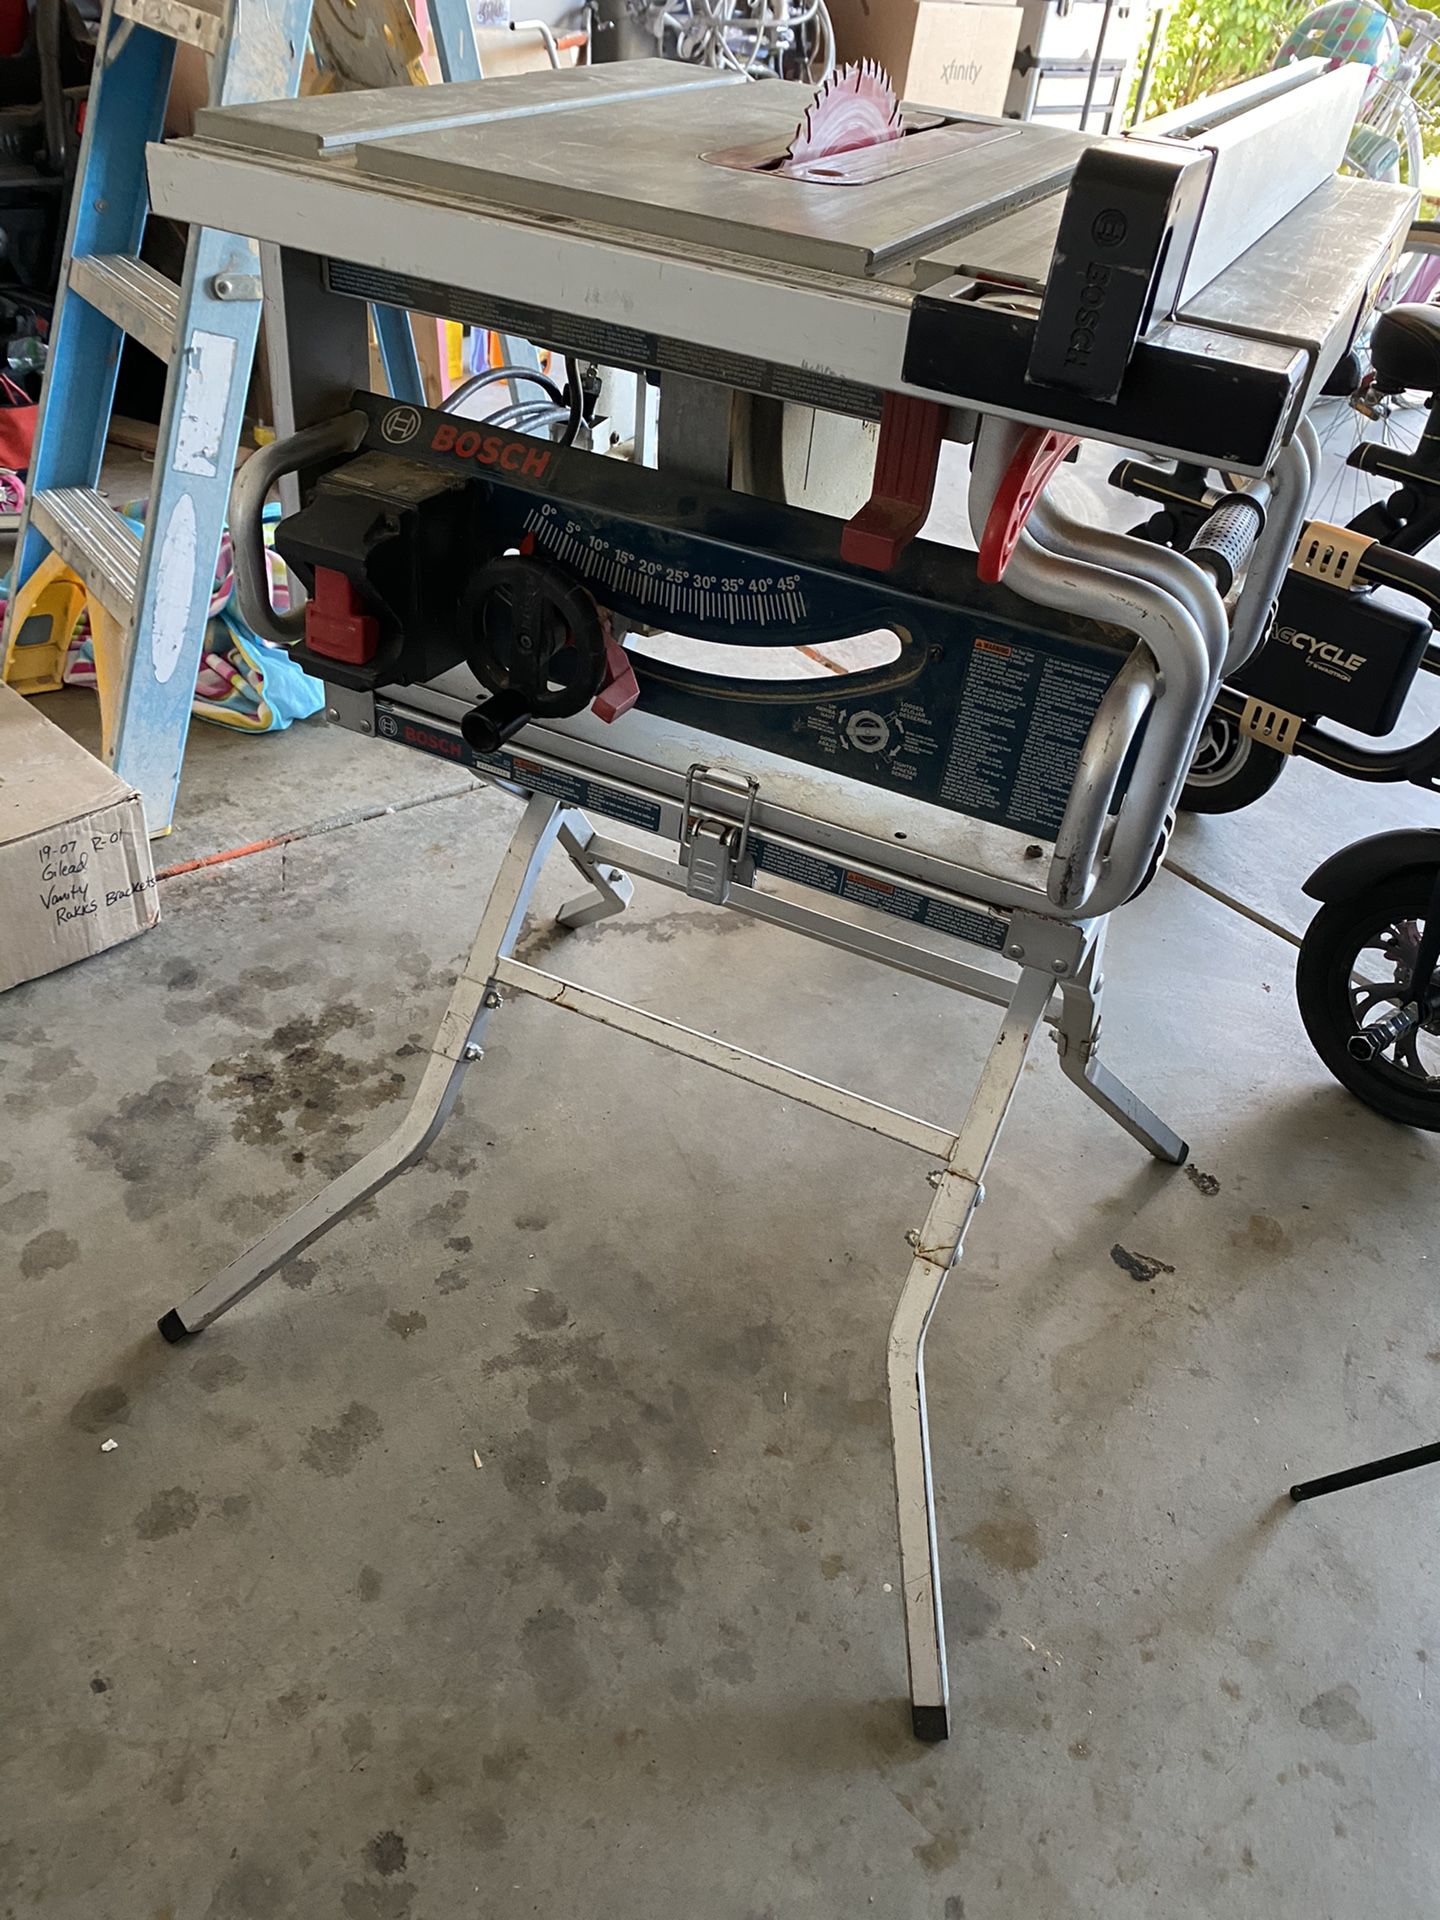 Bosch job site tablesaw with folding stand